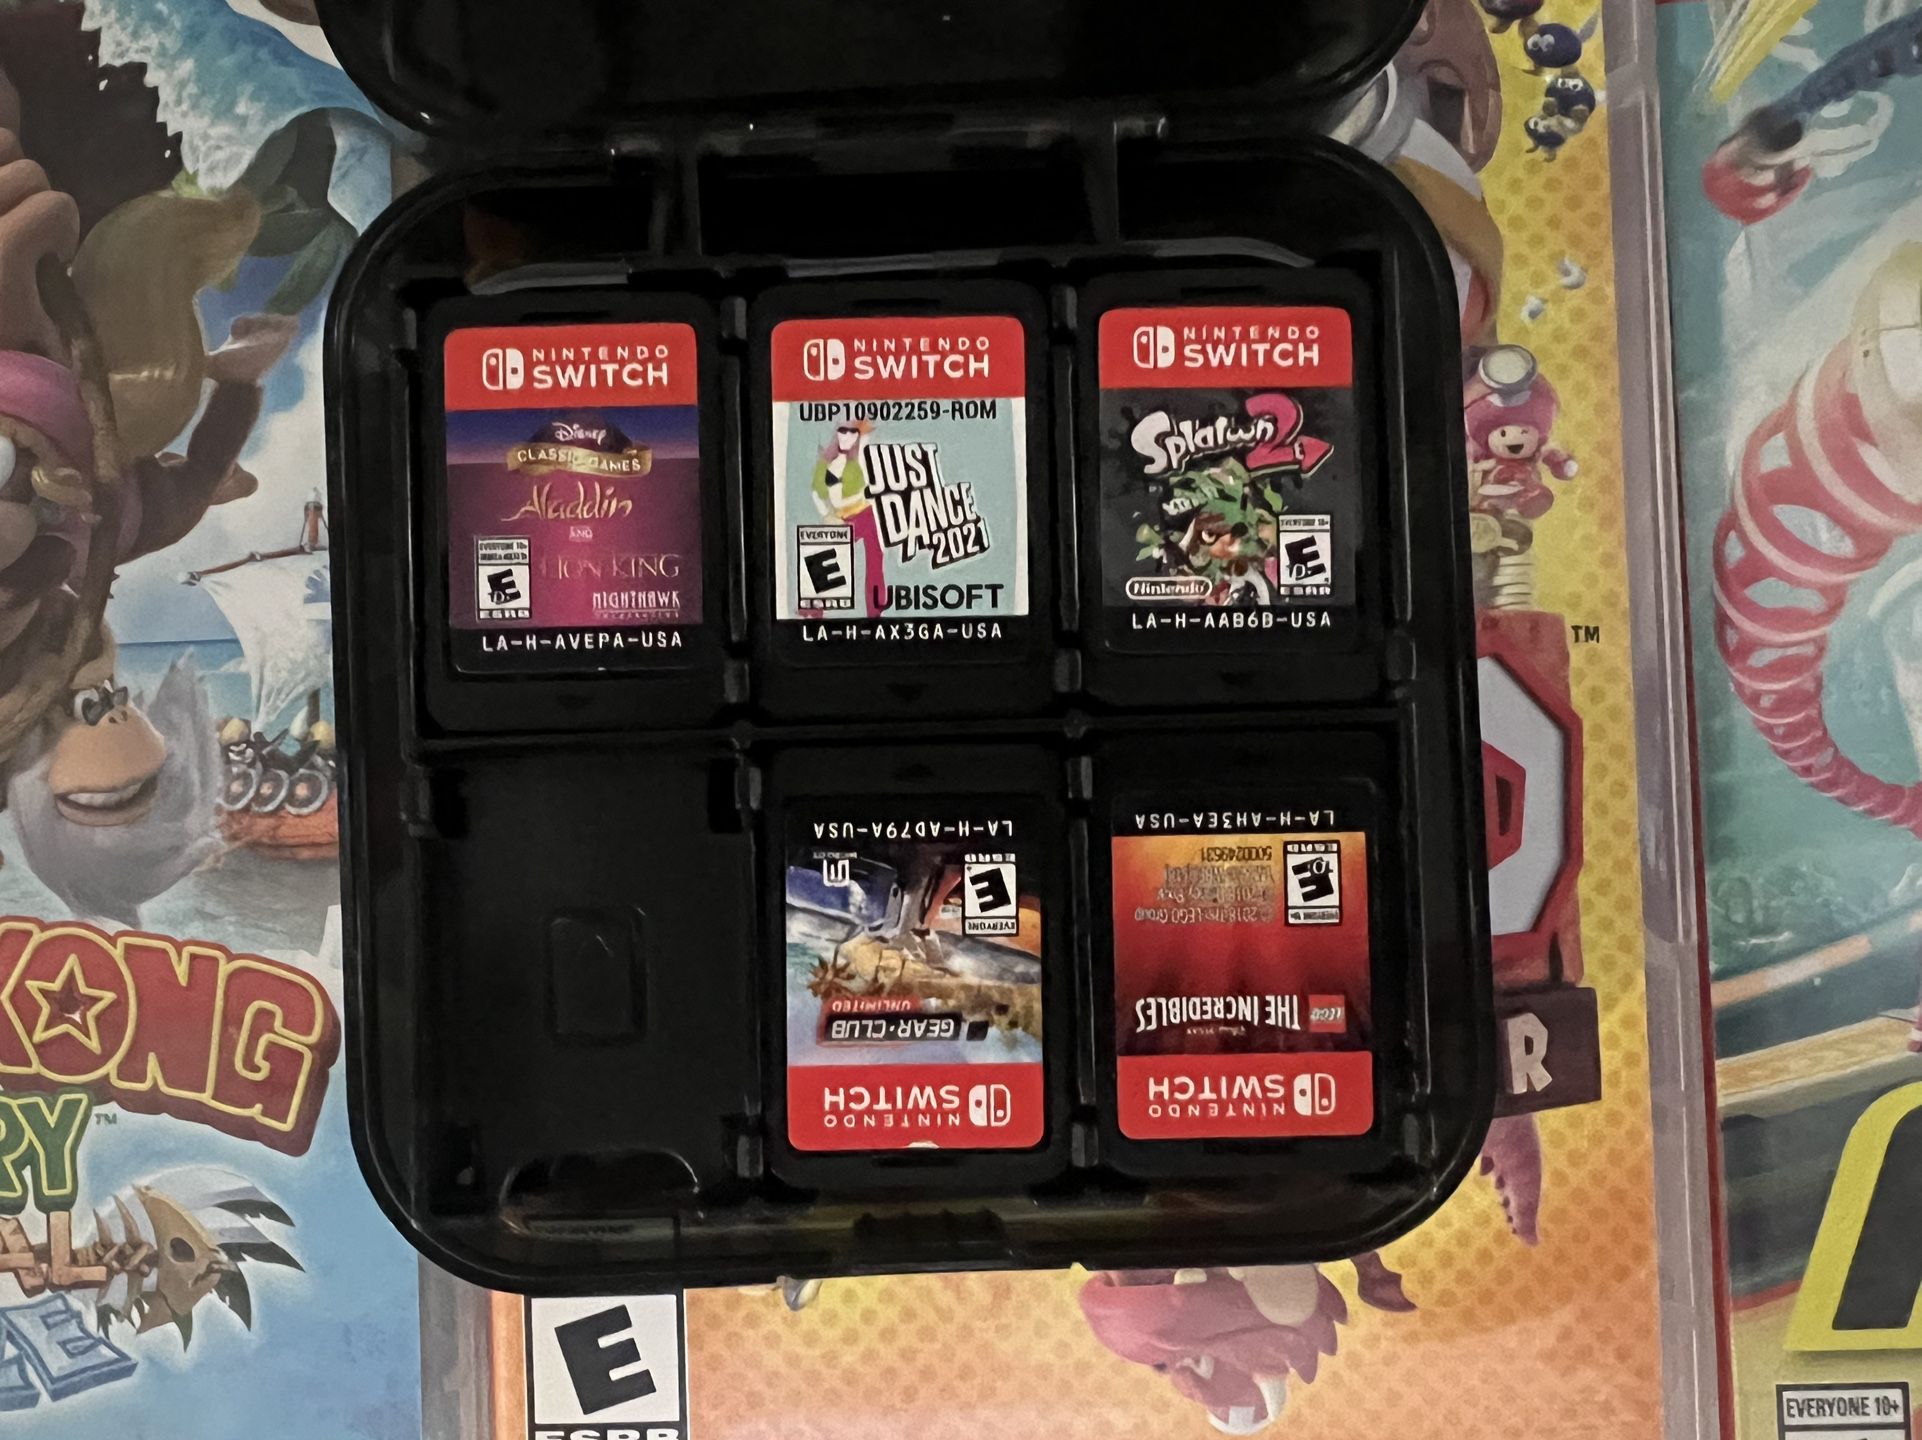 16 Nintendo Switch Games For Sale And one Pro Controller. 